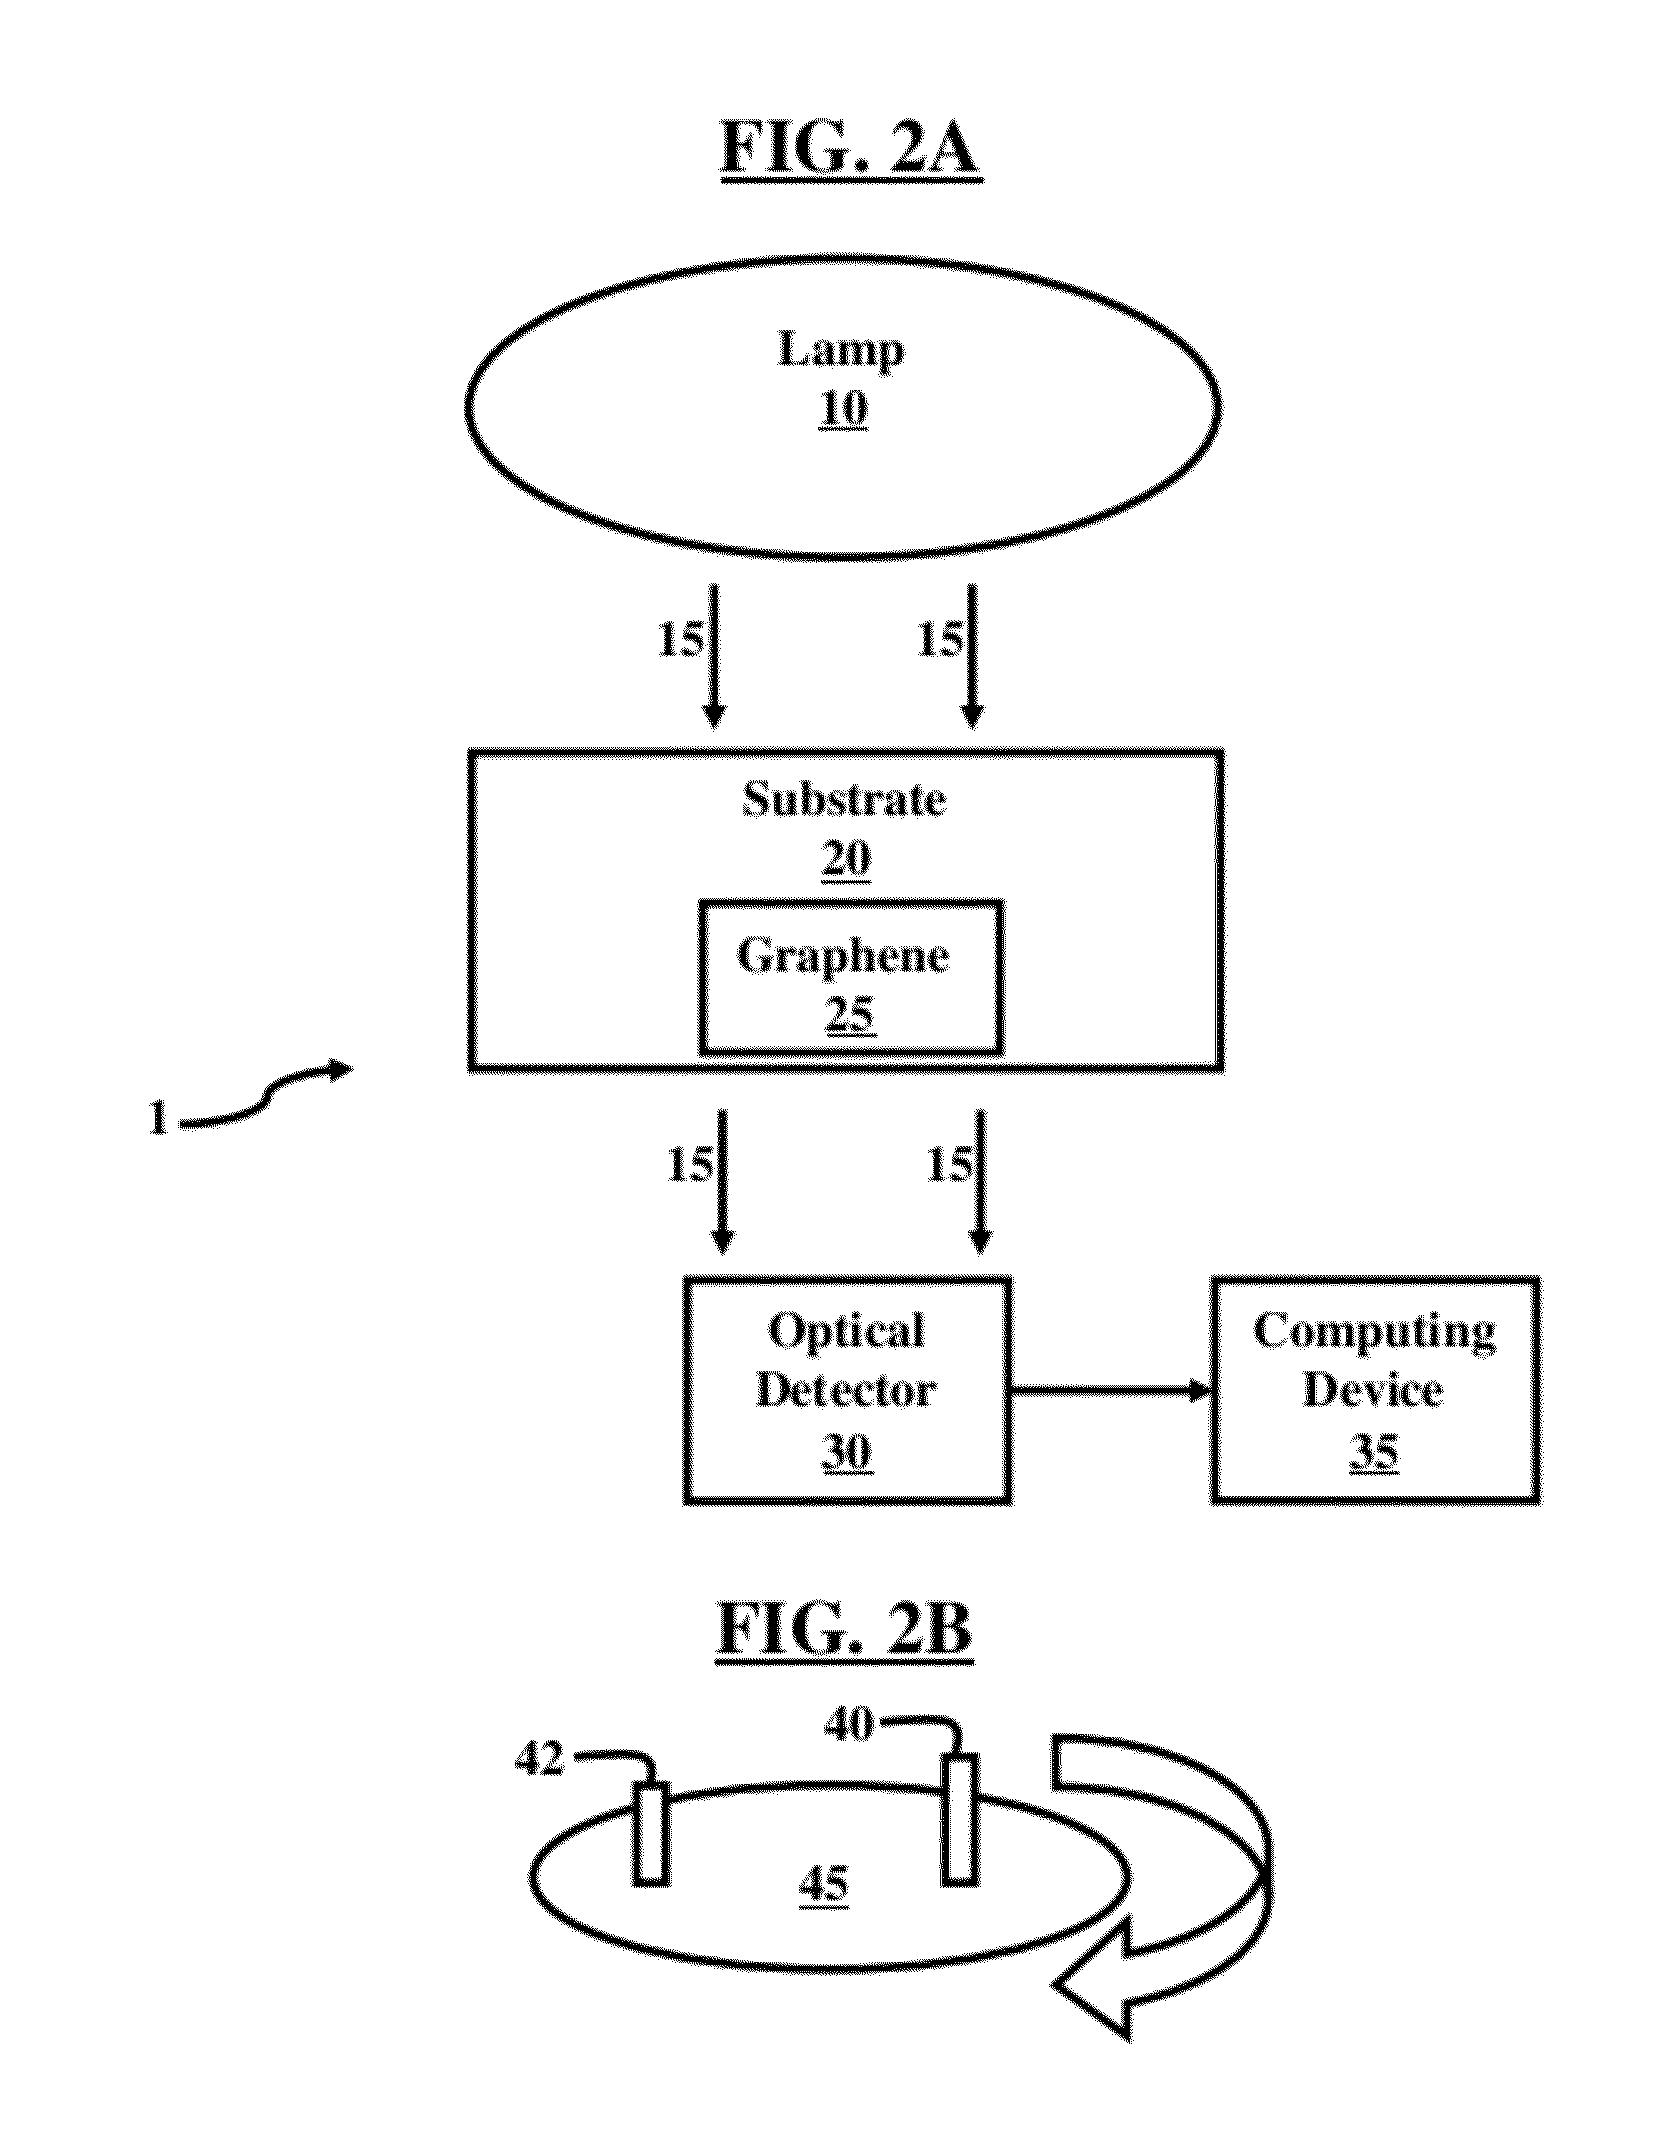 Method and System of Improved Uniformity Testing